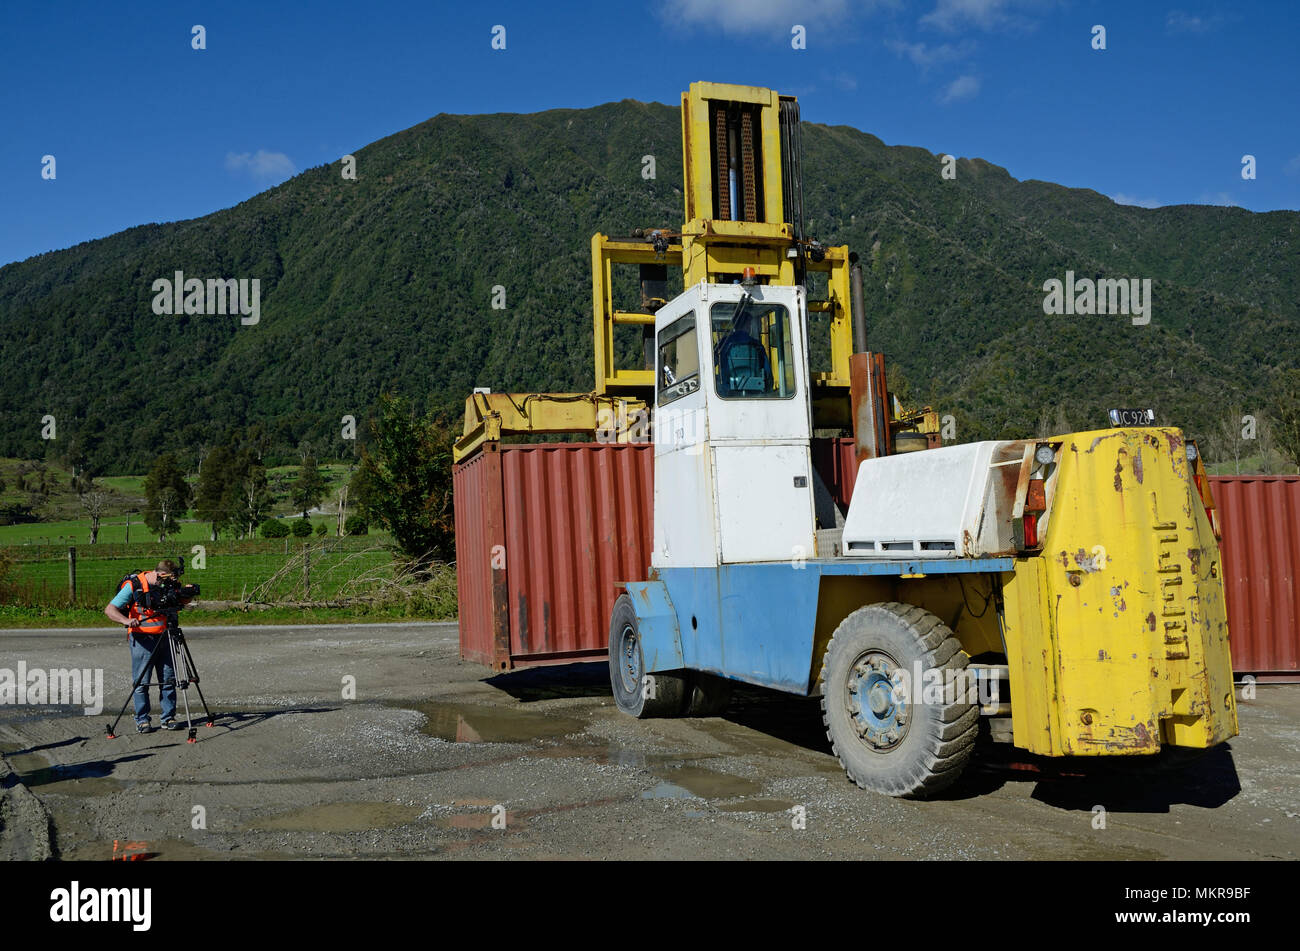 A cameraman films a huge forklift shifting a 20 foot shipping container in the yard of a large factory. Stock Photo